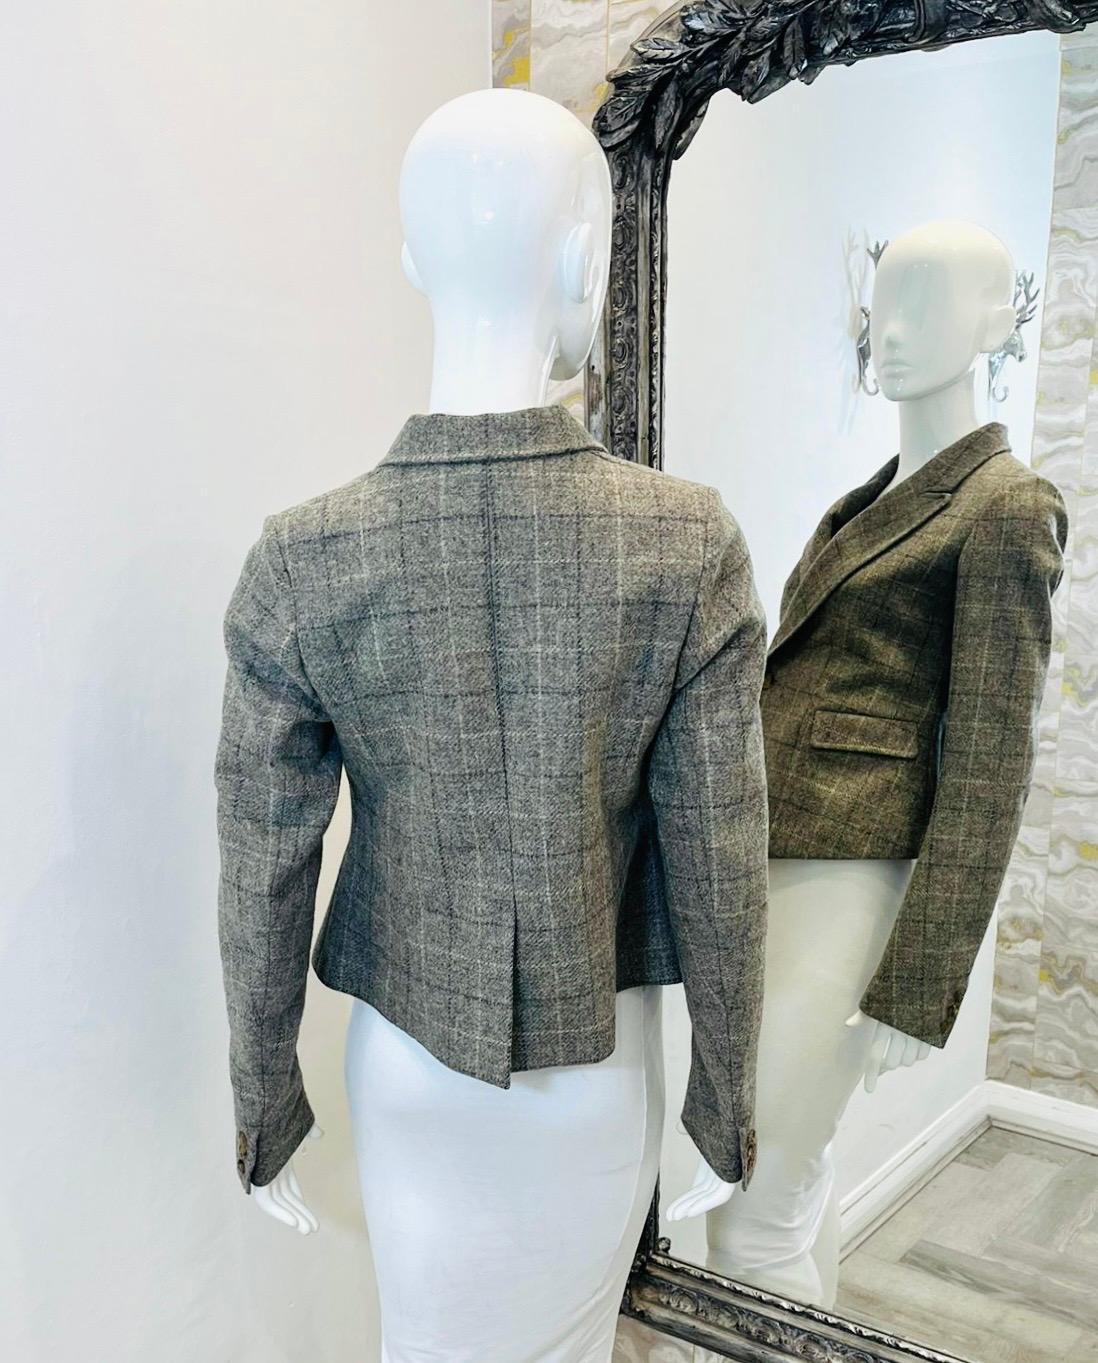 Mulberry Checked Jacket In Excellent Condition For Sale In London, GB